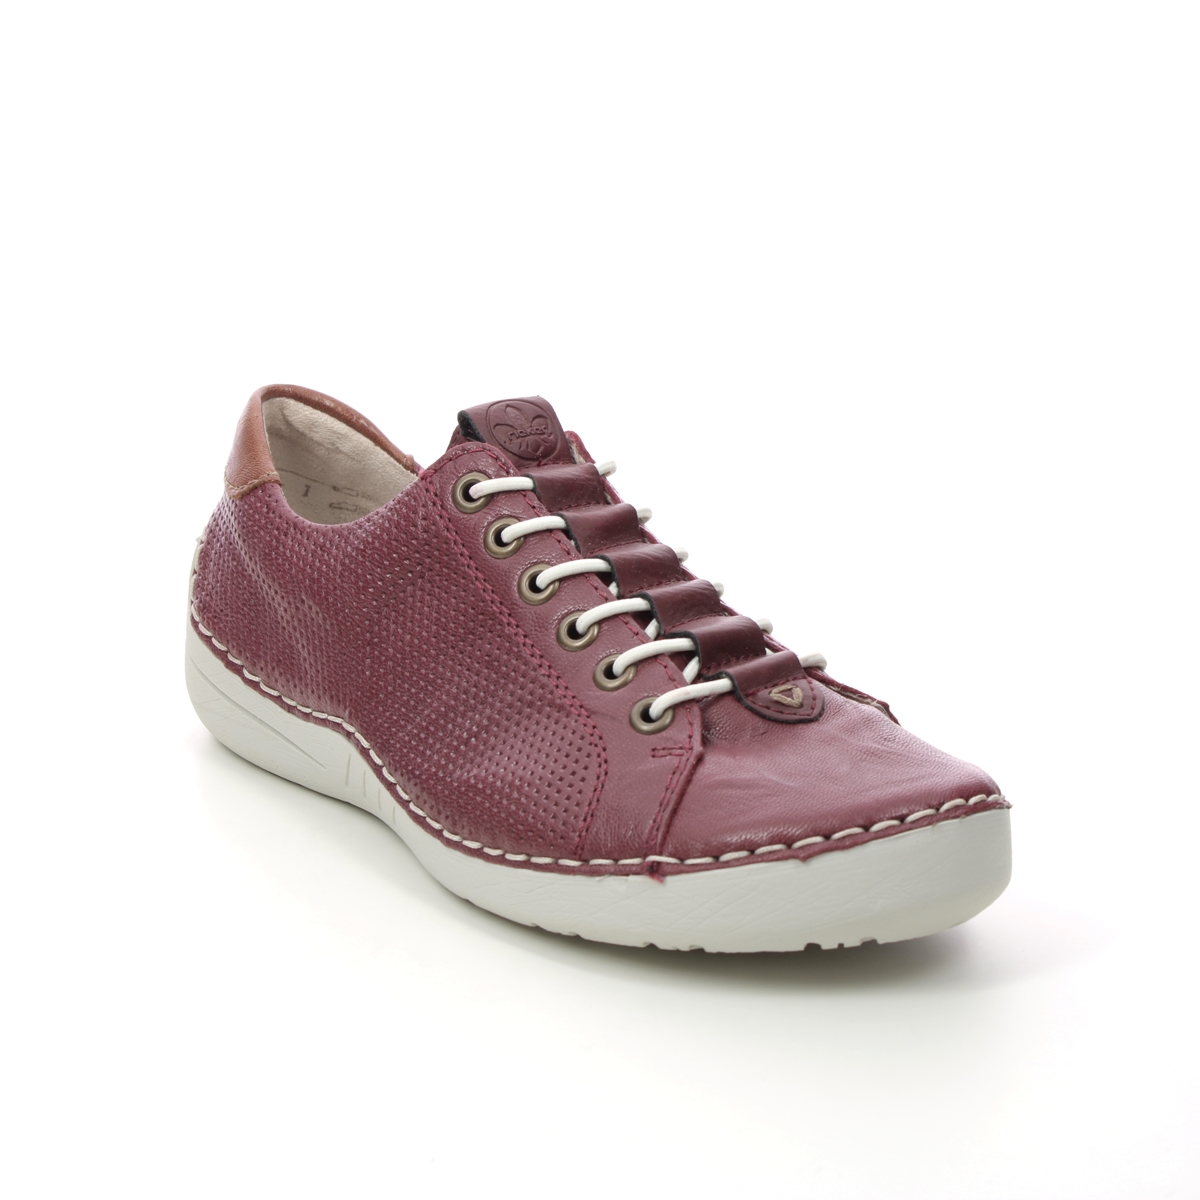 Rieker Funzela Wine Leather Womens Lacing Shoes 52585-35 In Size 41 In Plain Wine Leather